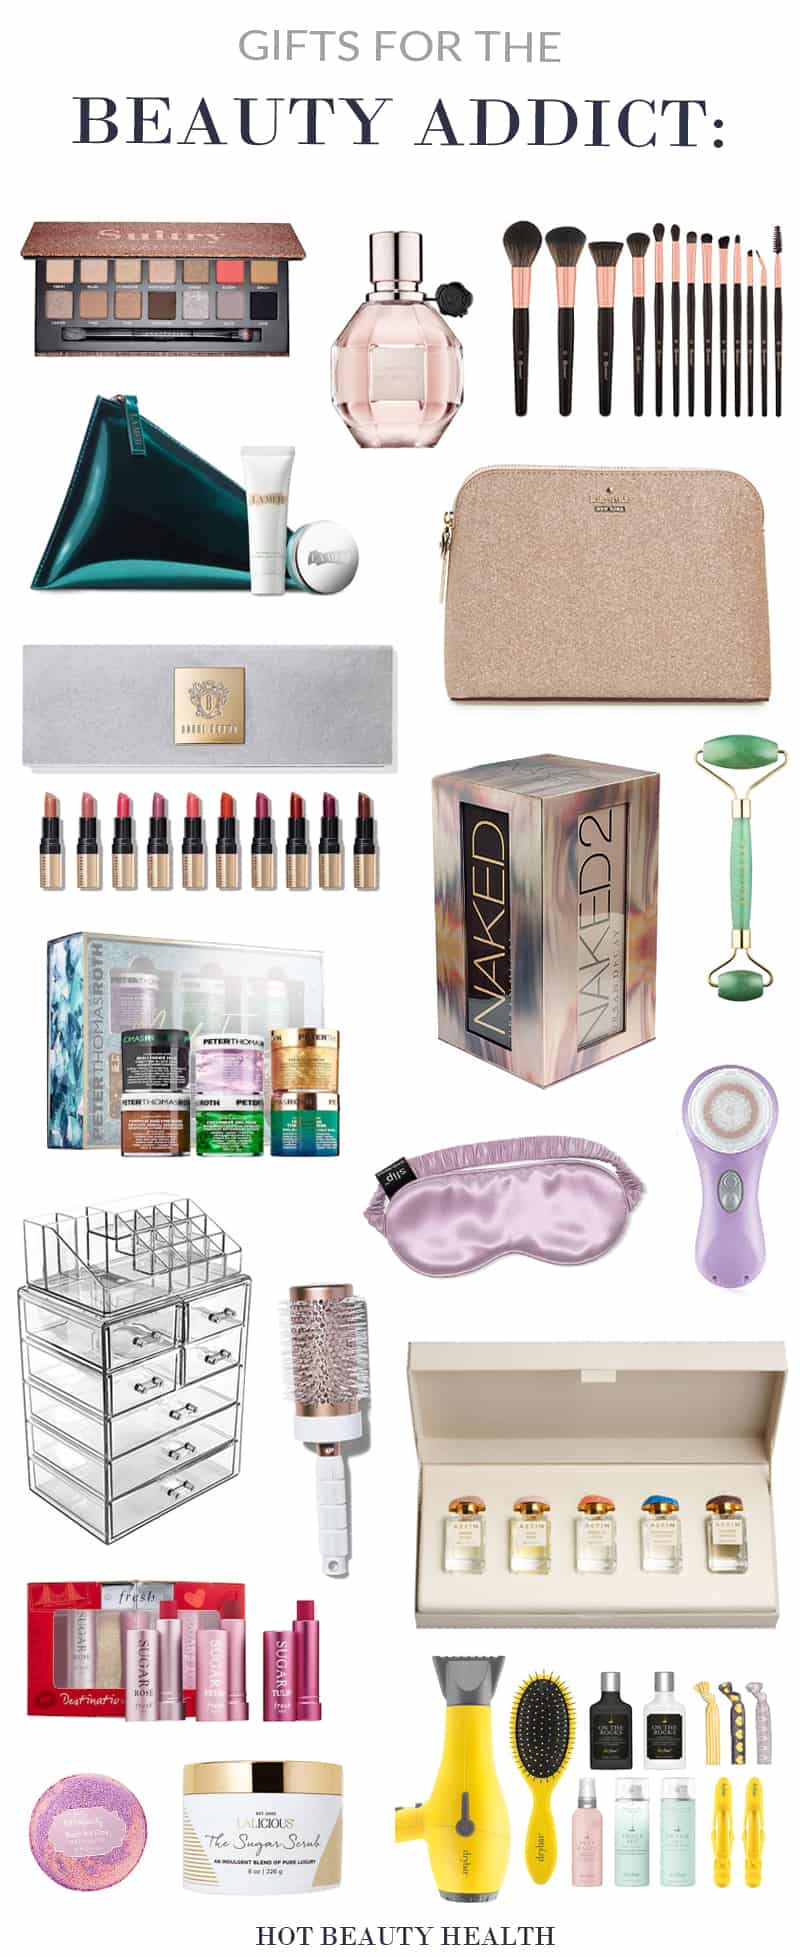 Gifts for the Beauty Addict